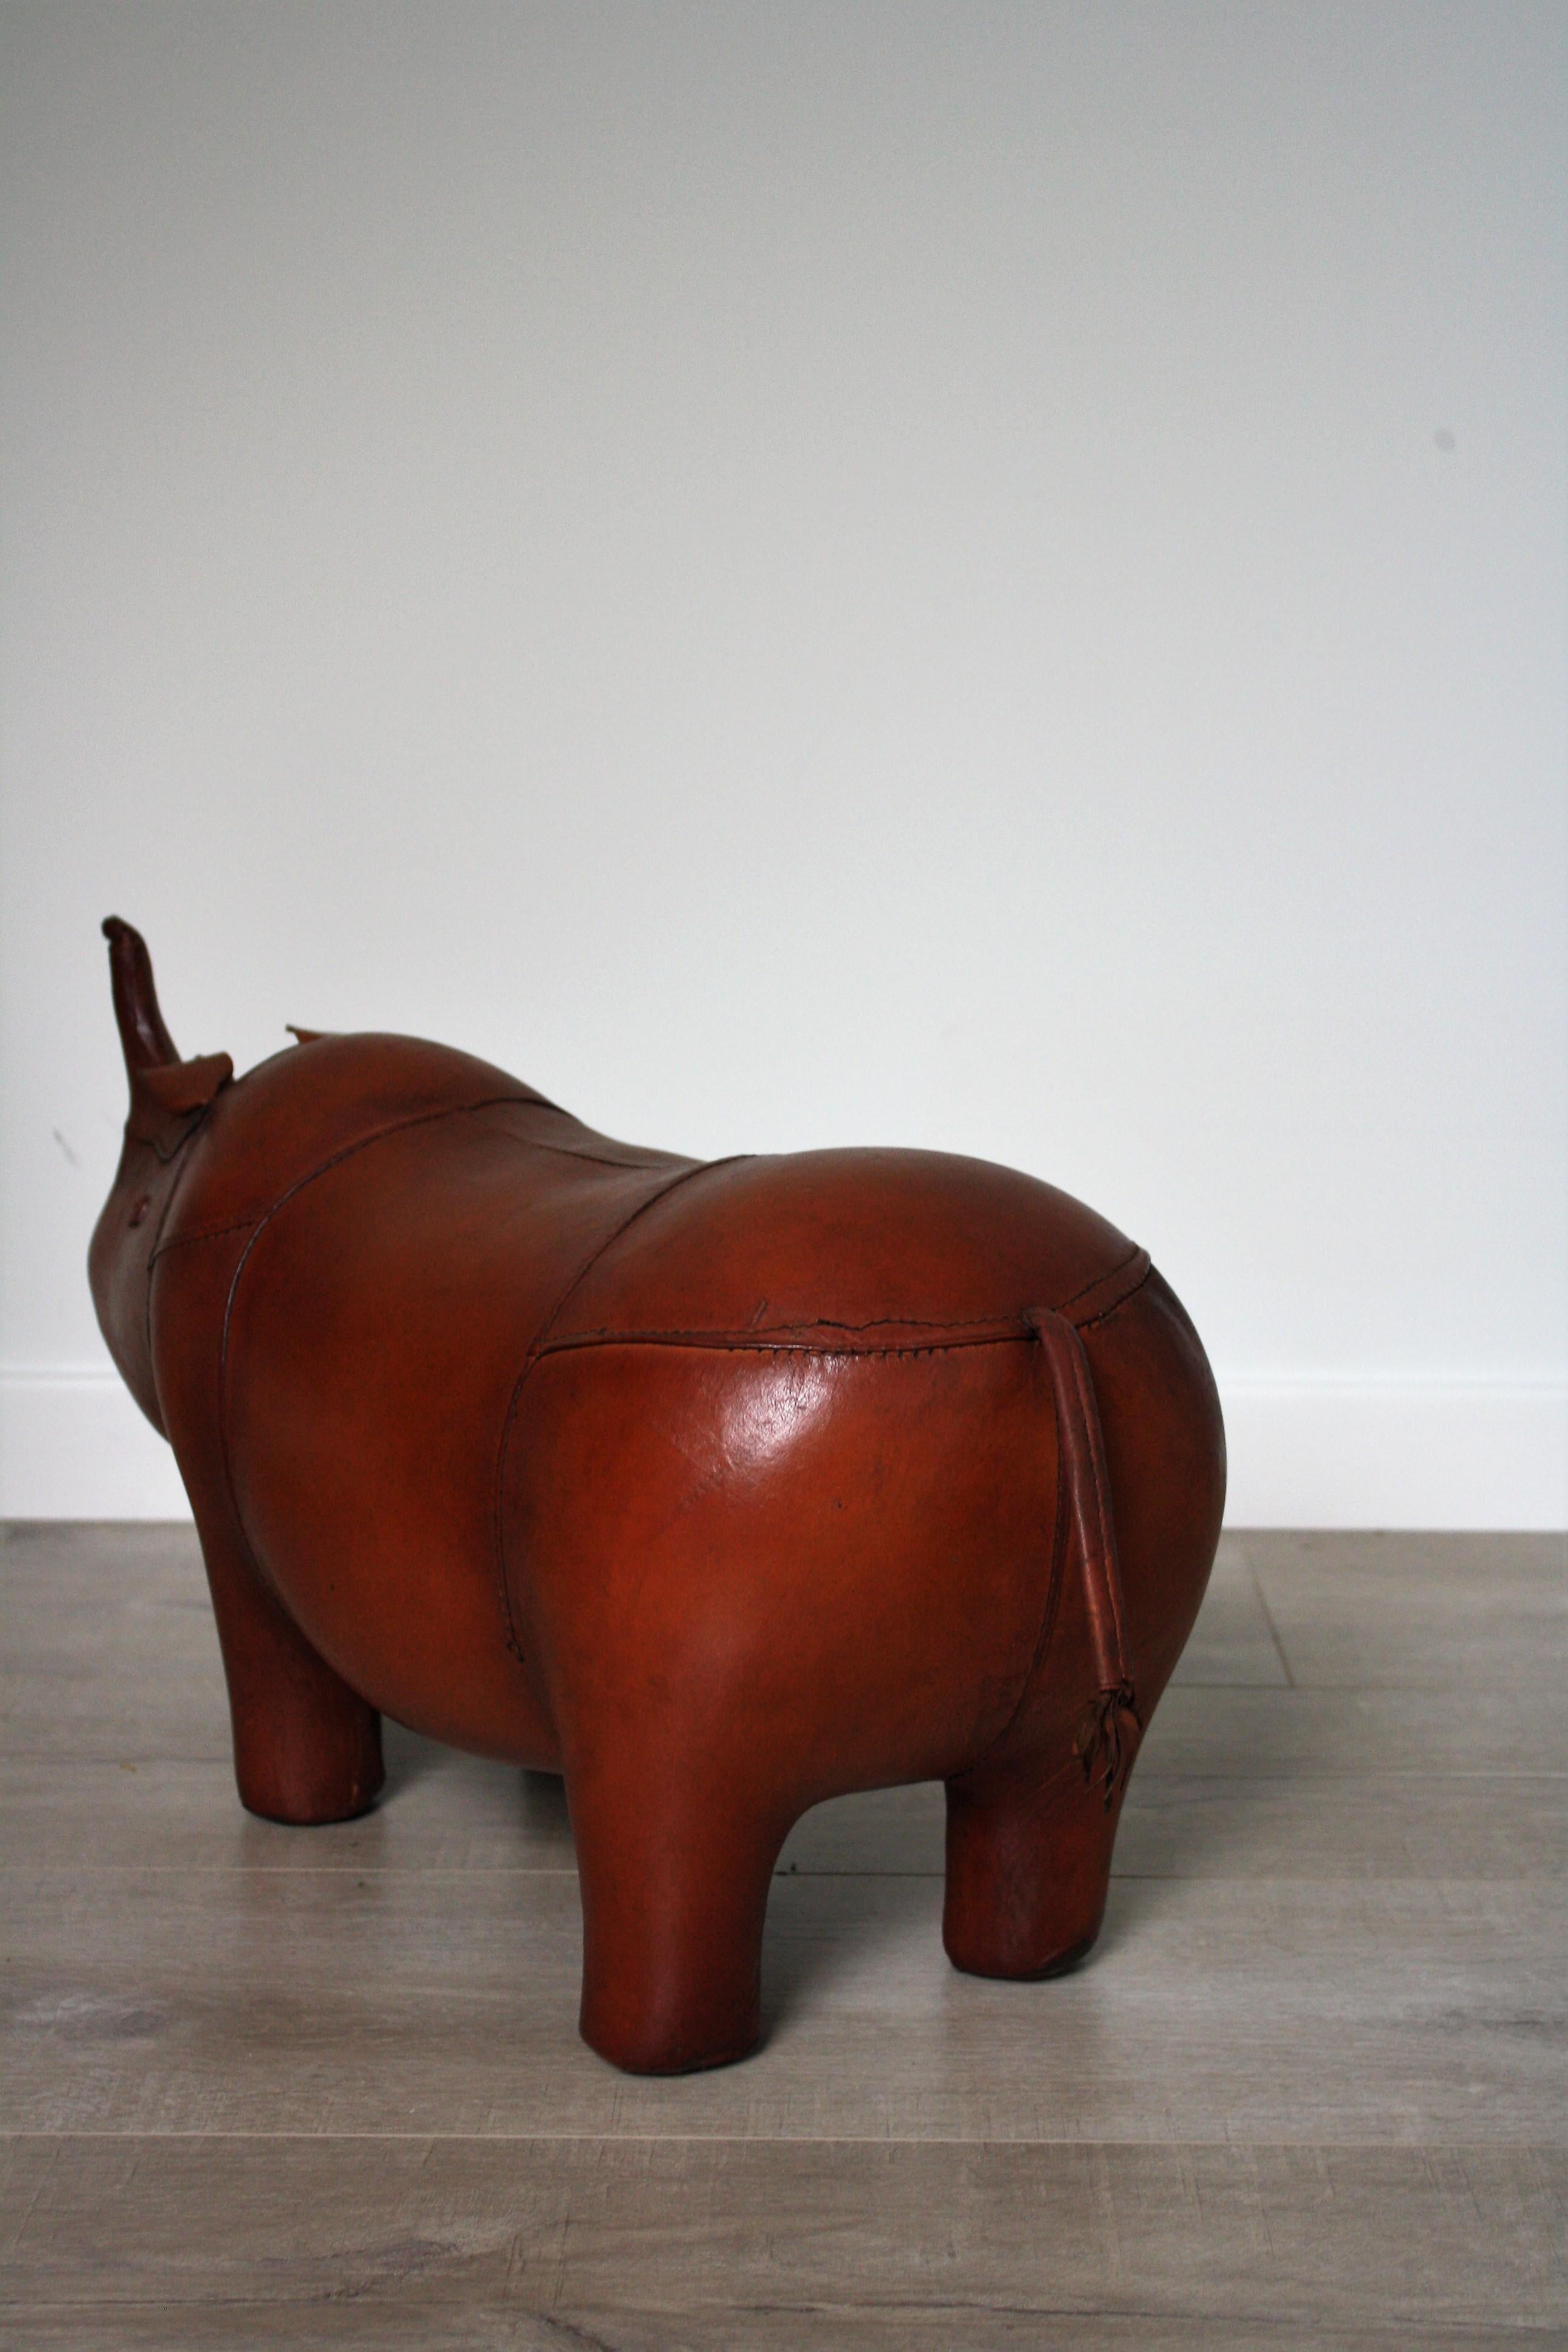 Late 20th Century Small Vintage Rhinoceros Leather Foot Stool by Dimitri Omersa for Abercrombie